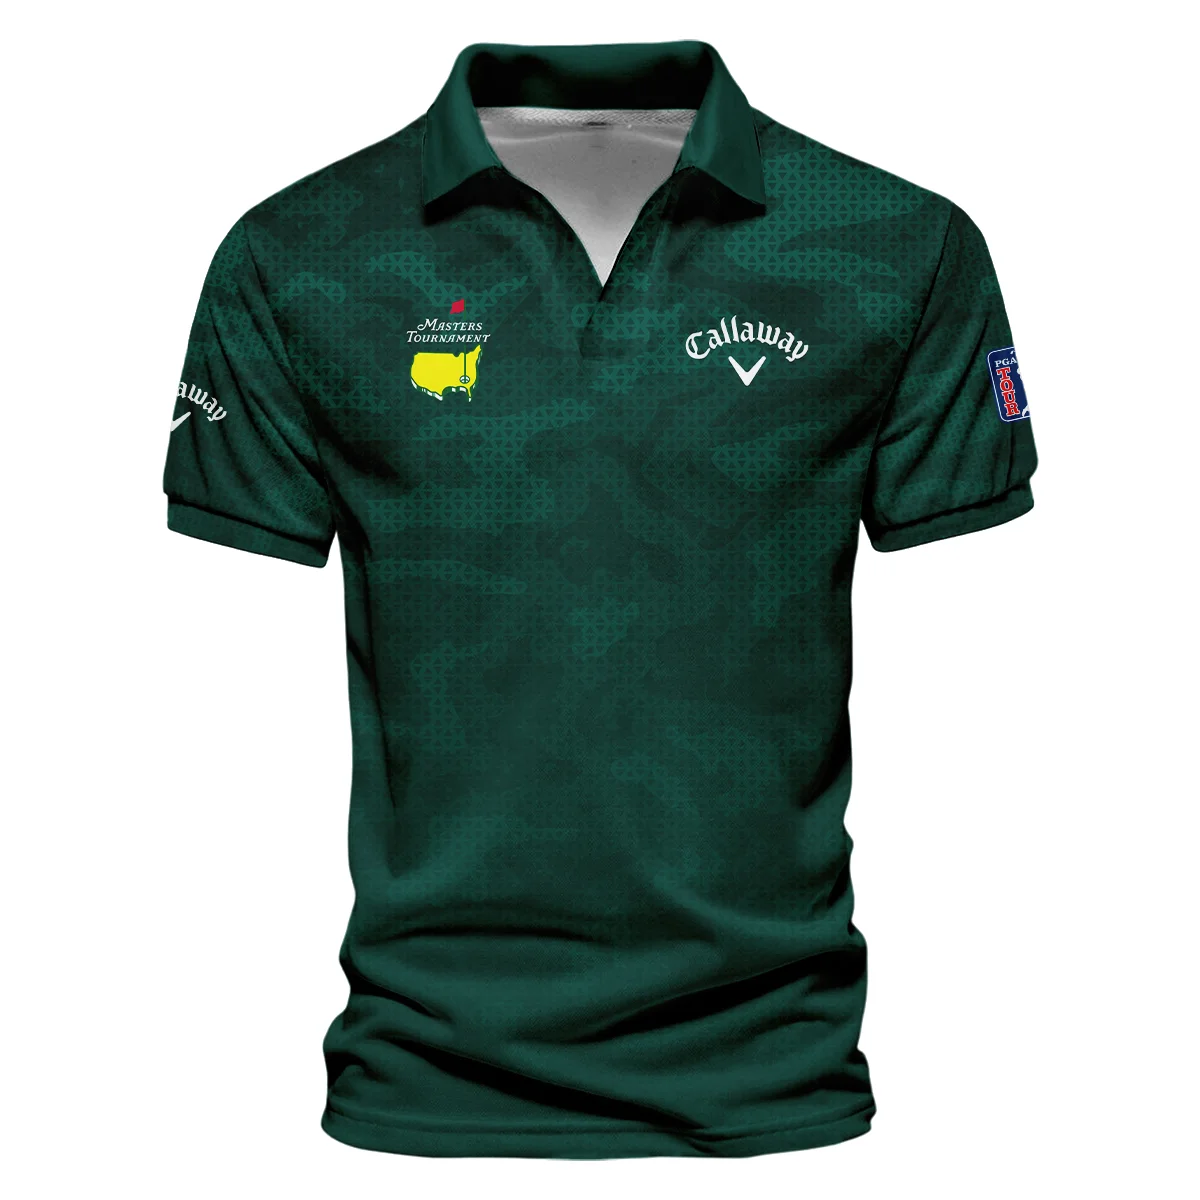 Masters Tournament Callaway Camo Sport Green Abstract Vneck Polo Shirt Style Classic Polo Shirt For Men